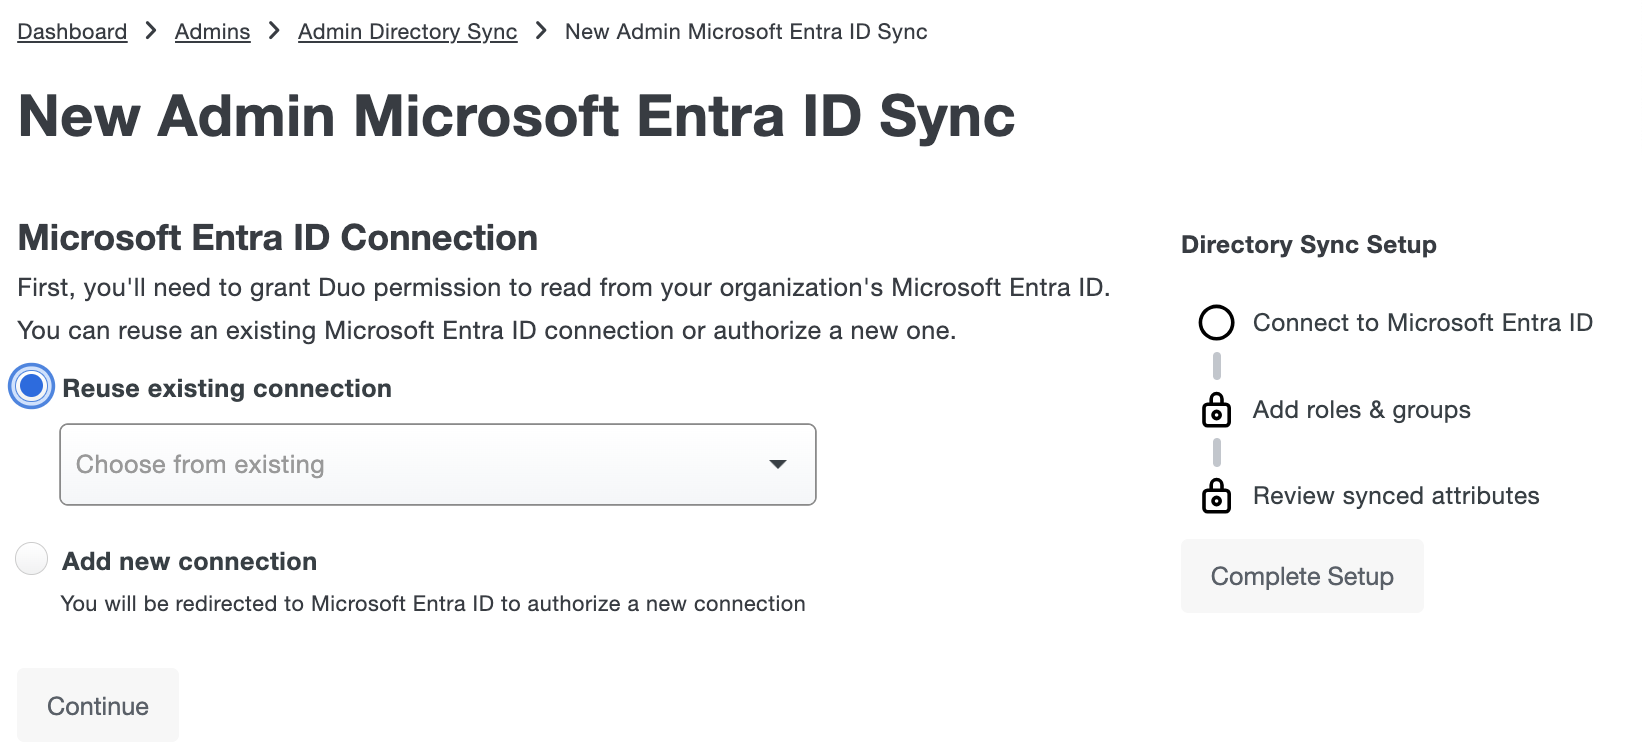 Reuse Admin Azure AD Sync Connection